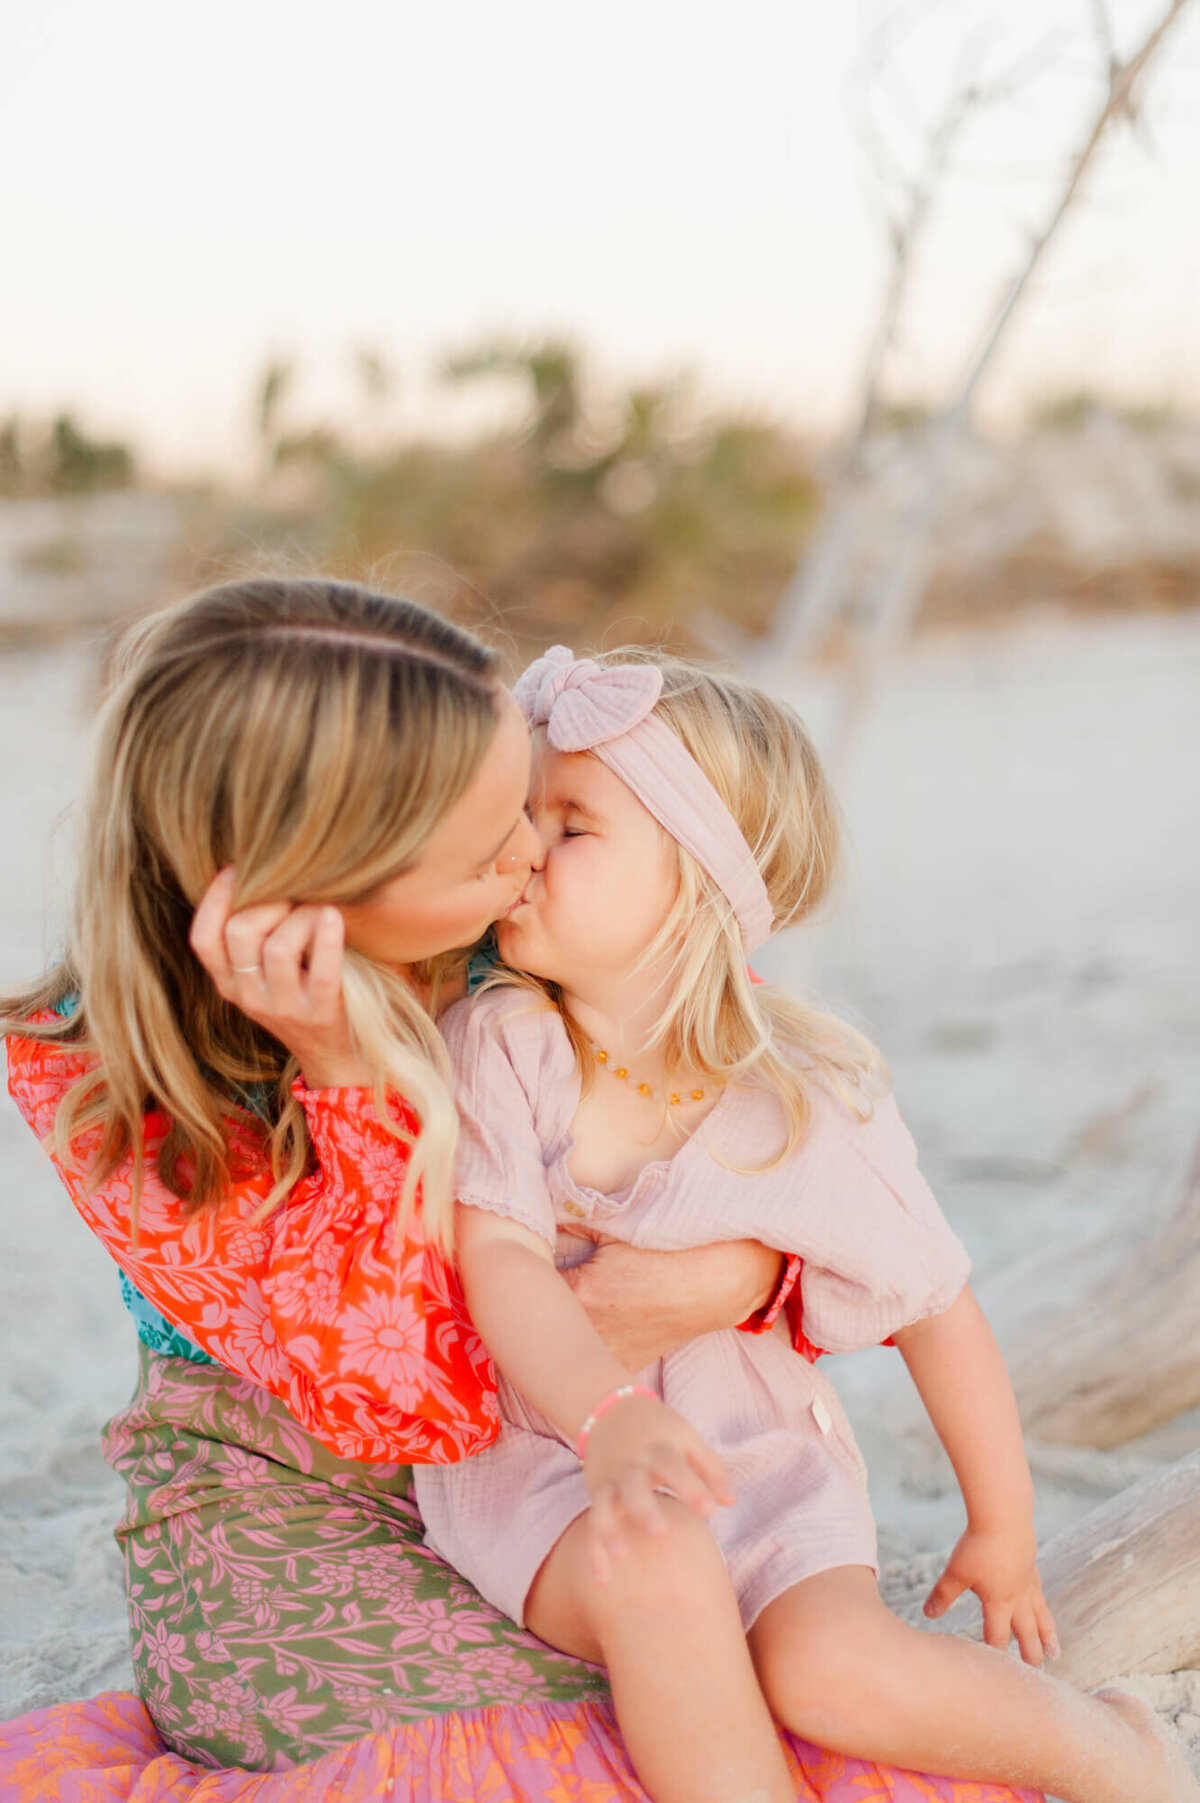 Young daughter kissing her mom while sitting in the sand at sunset